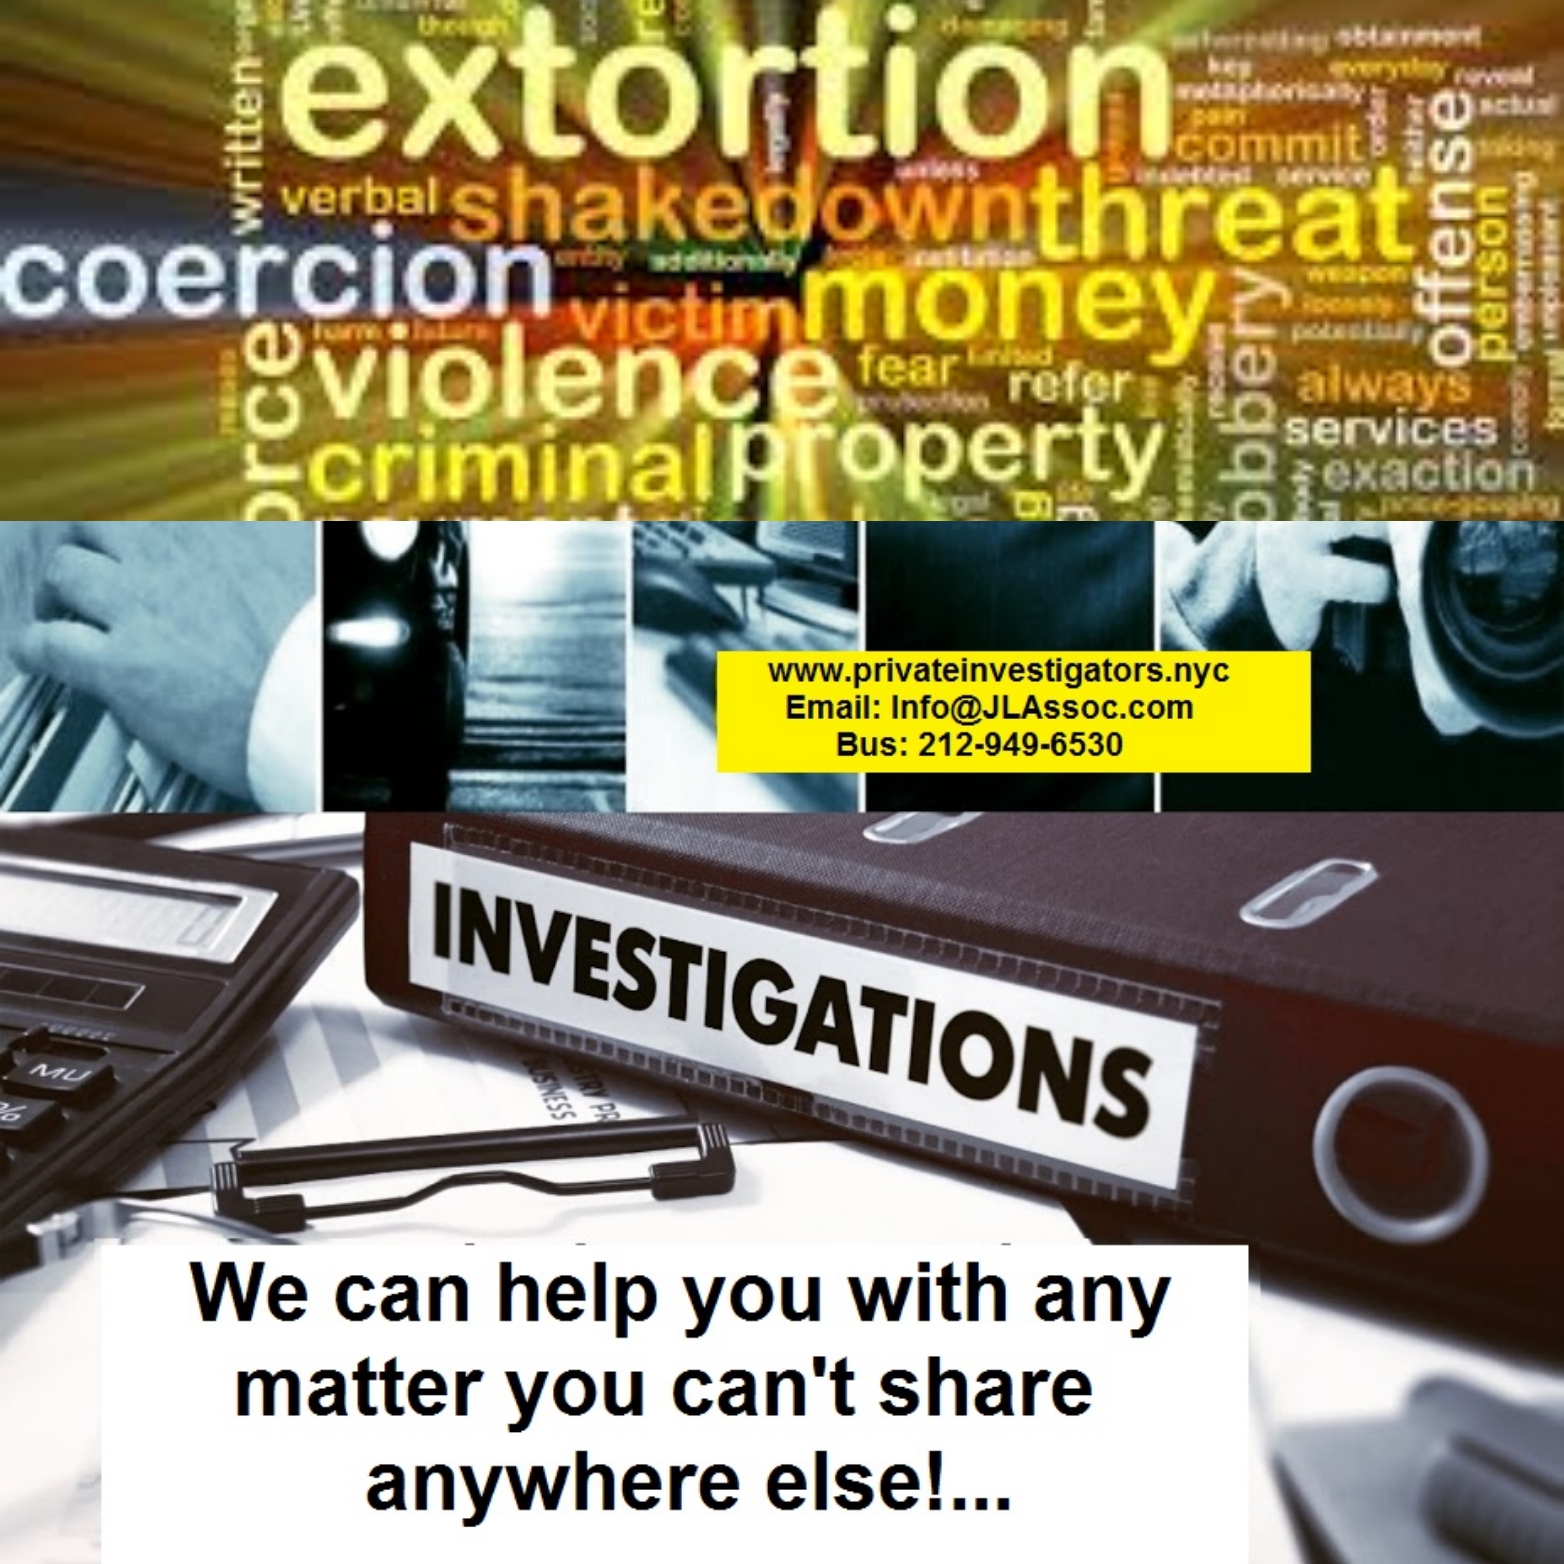 Extortion & Blackmail Investigations